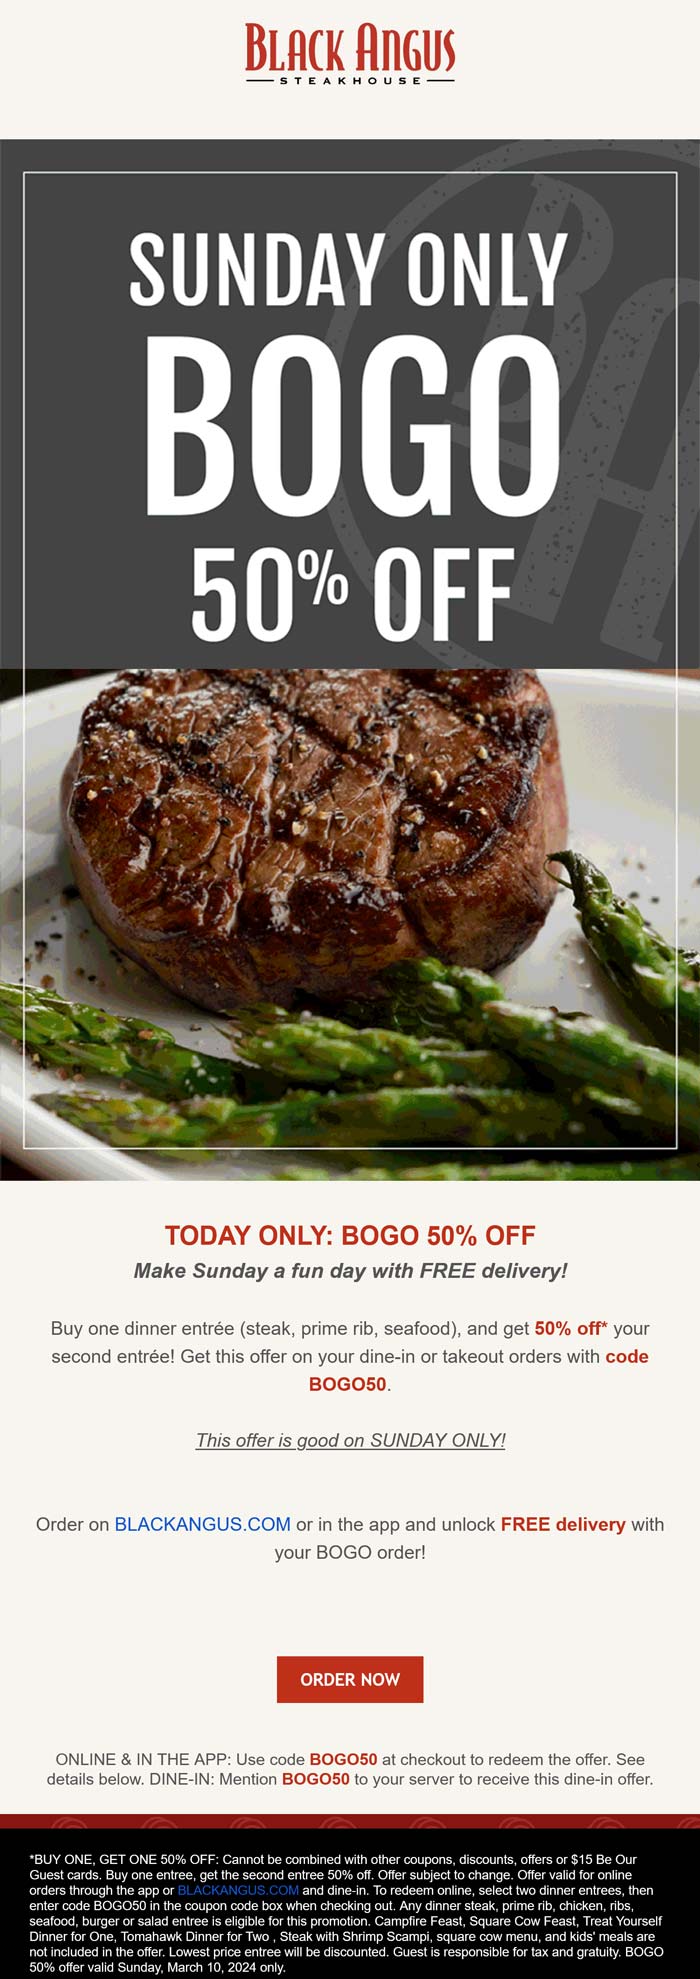 Black Angus restaurants Coupon  Second entree 50% off today at Black Angus steakhouse #blackangus 